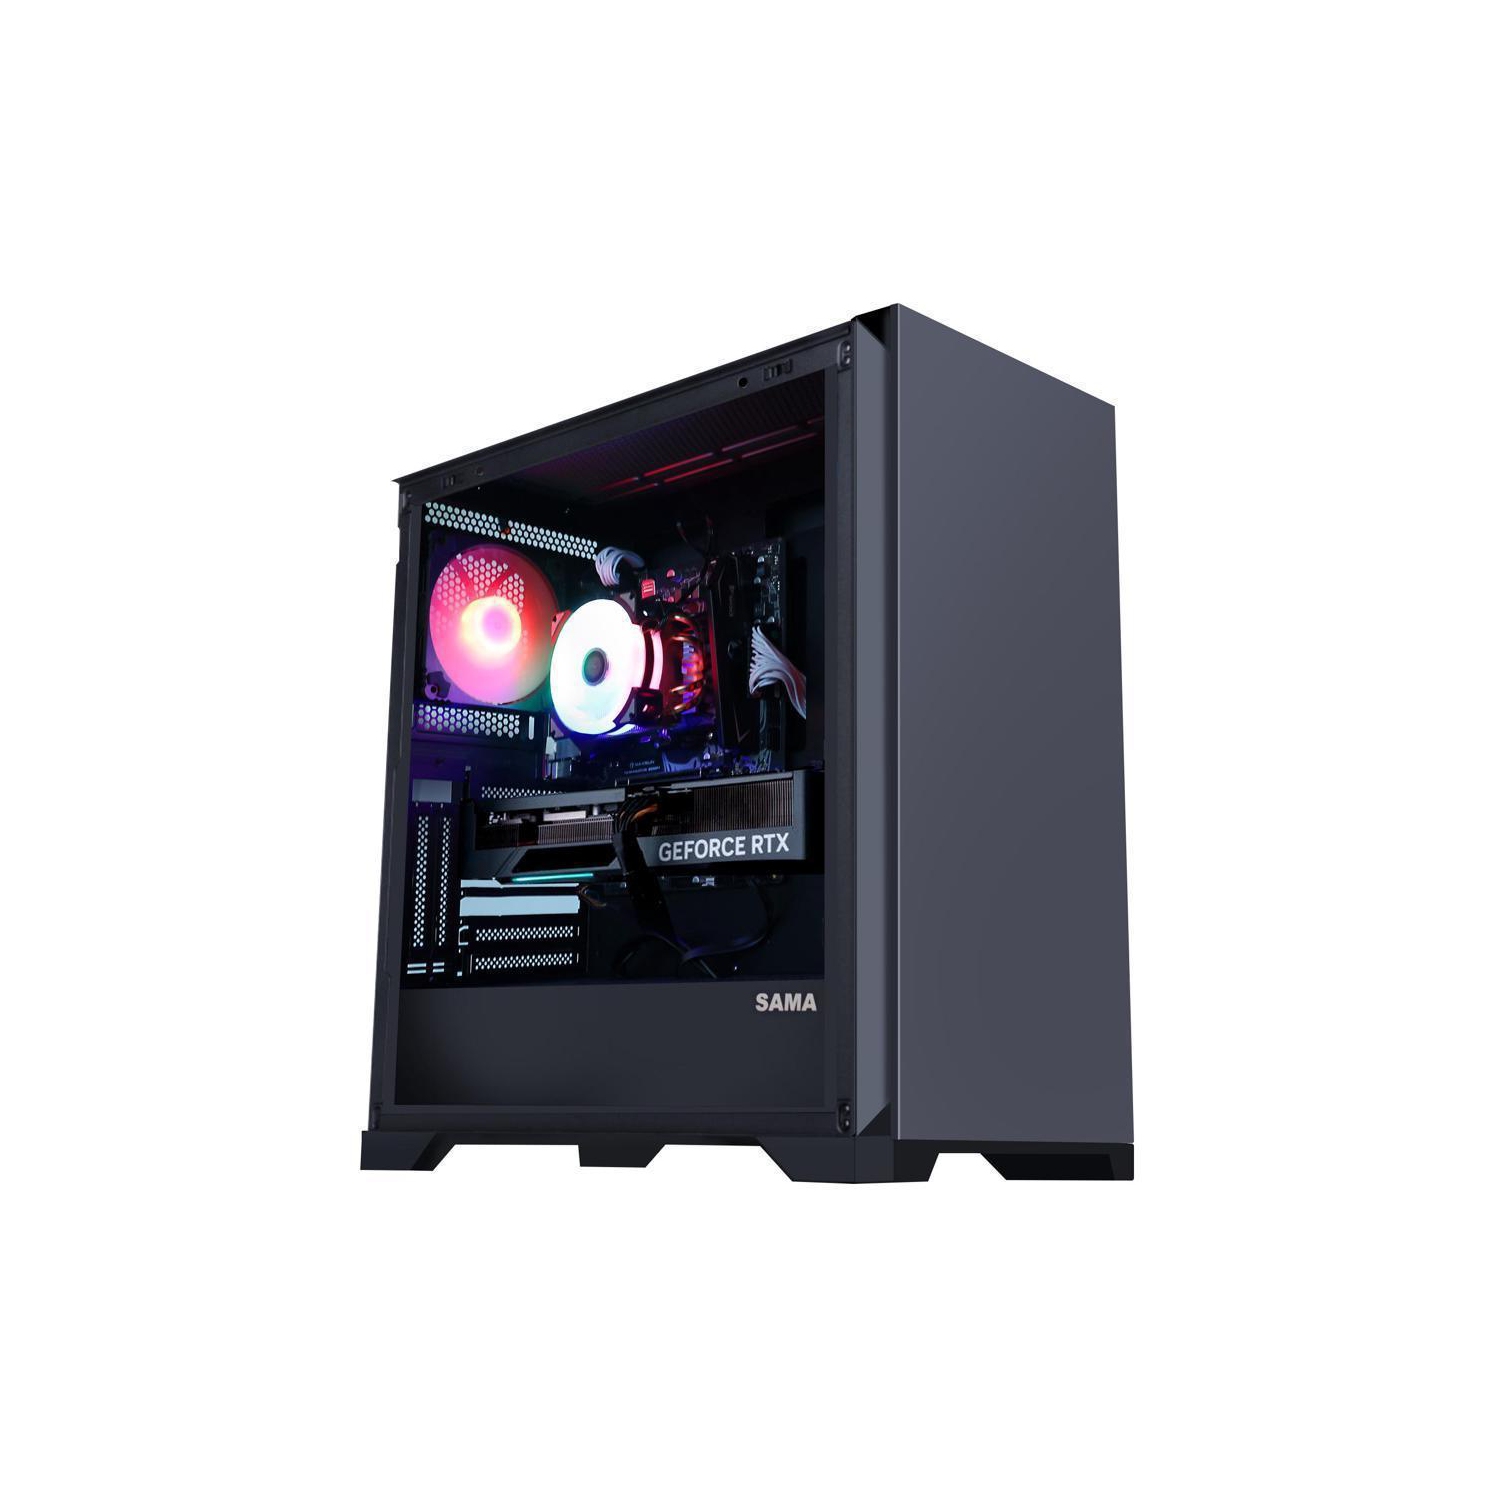 Hoengager Ares Gaming - Intel Core i5-12600K 10-Core 3.7GHz- RX 6750 XT 12G - 16GB DDR4 3200MHz - 500GB M.2 + 2TB 2.5'' SATA SSD- WIFI -RGB Fans - Windows 11 Pro Computer